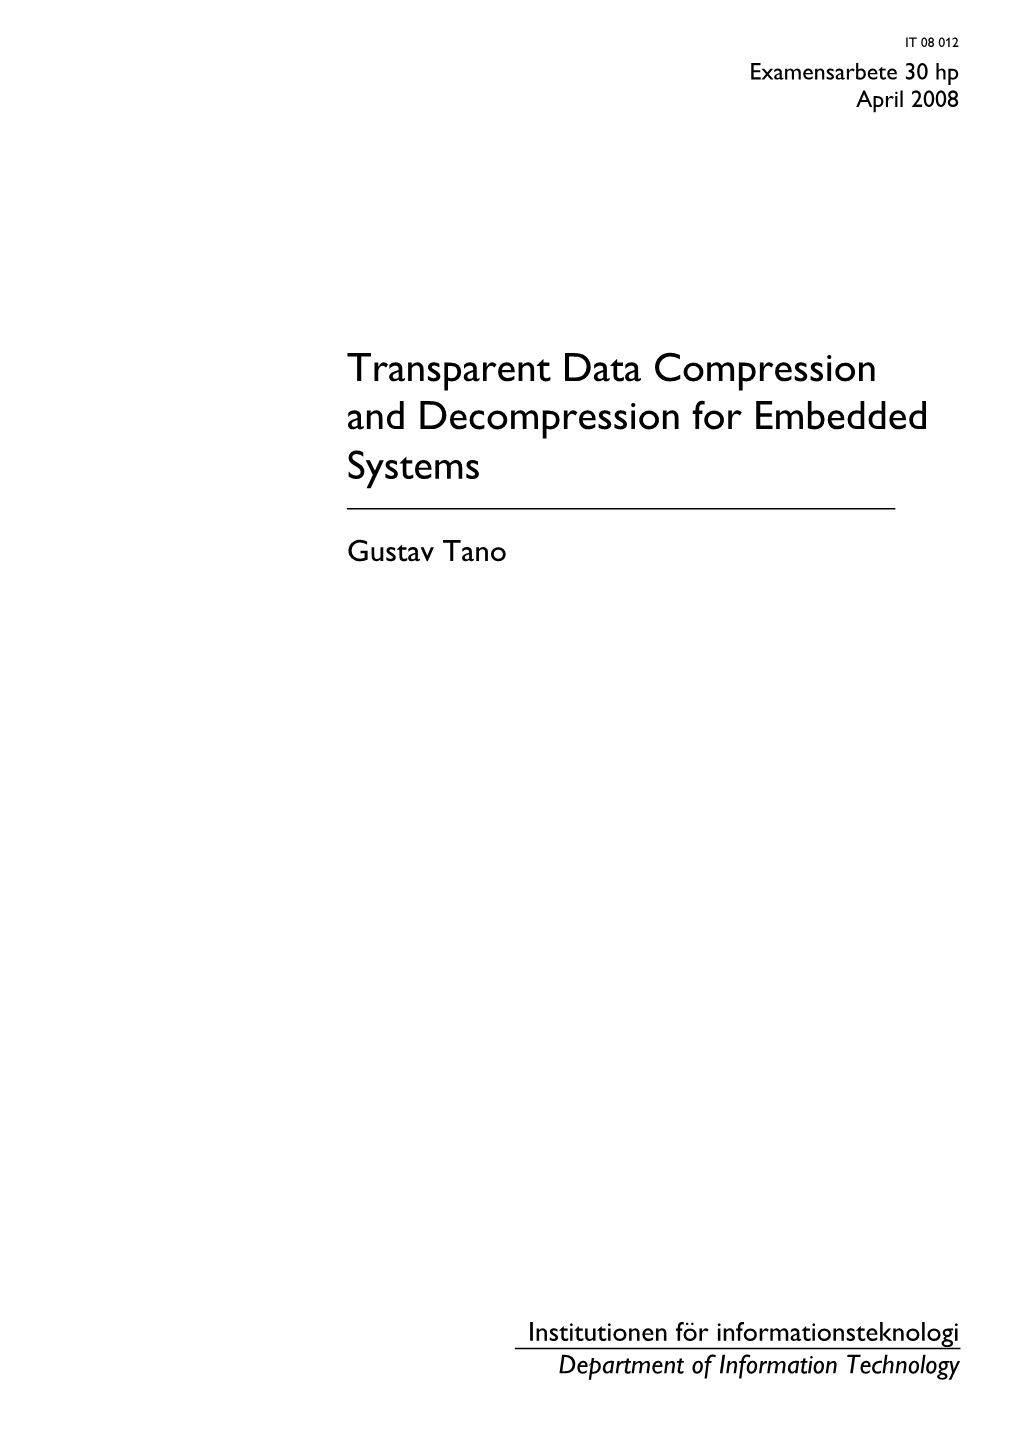 Transparent Data Compression and Decompression for Embedded Systems